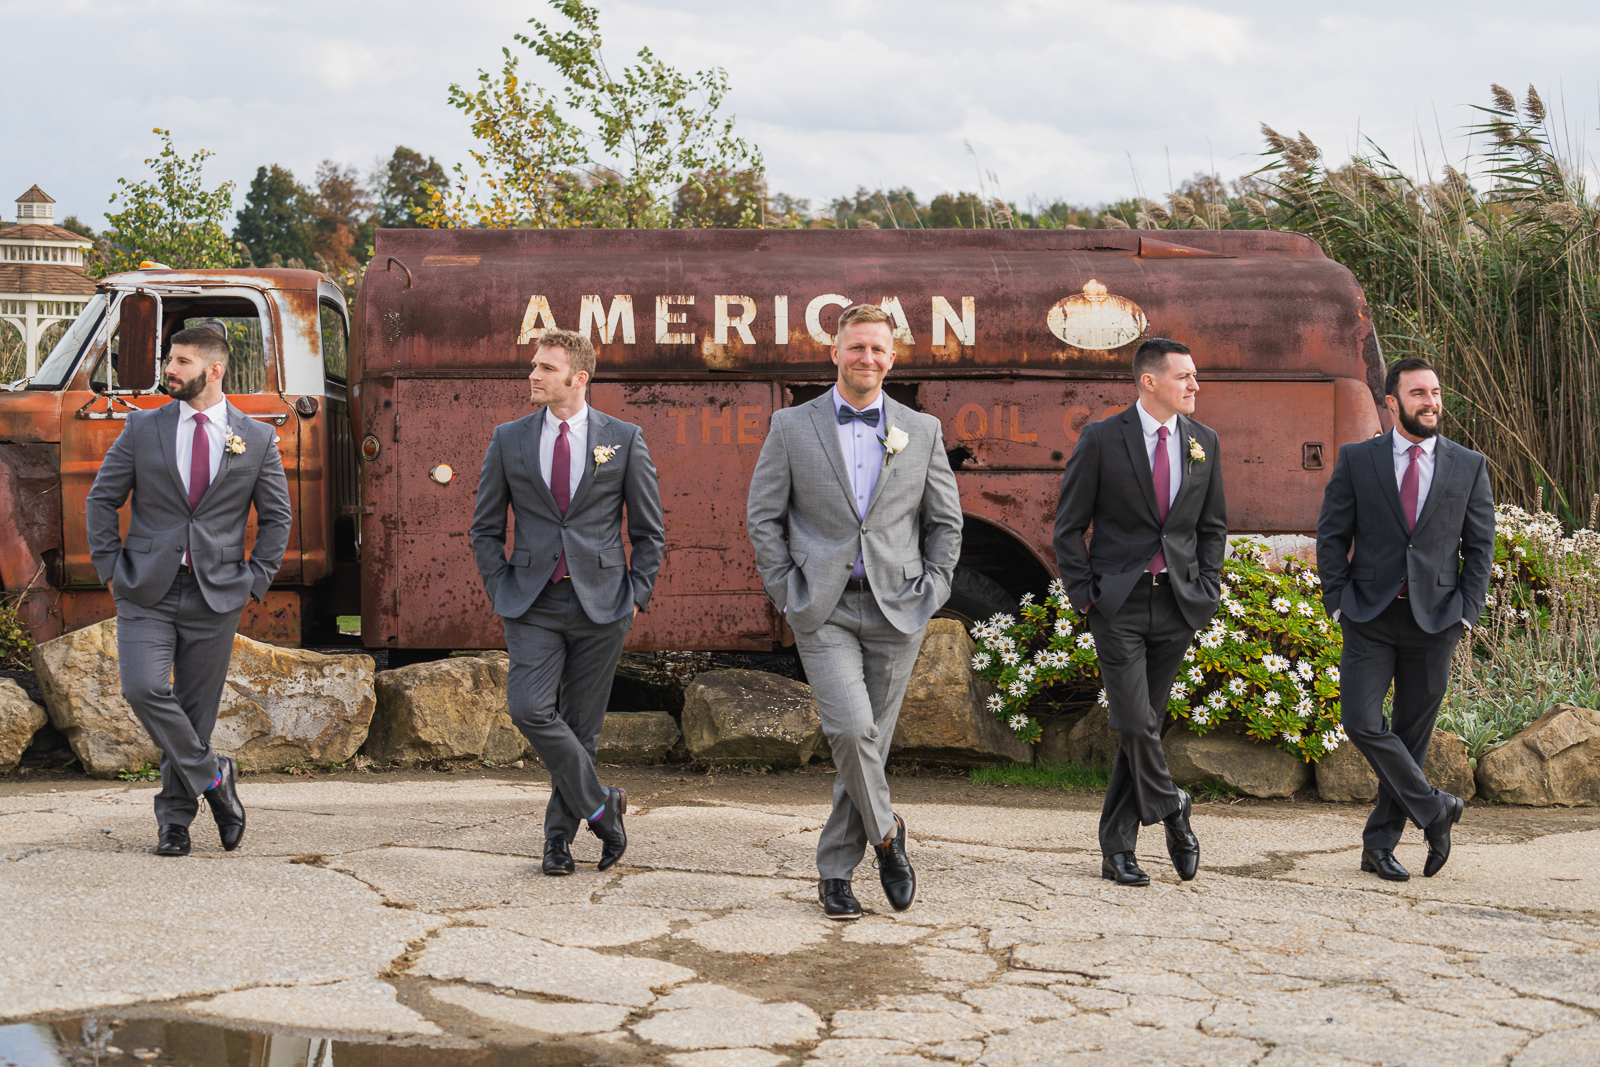 Groom with groomsmen, bridal party portrait, old truck, American oil, fall wedding, rustic outdoor wedding ceremony at White Birch Barn